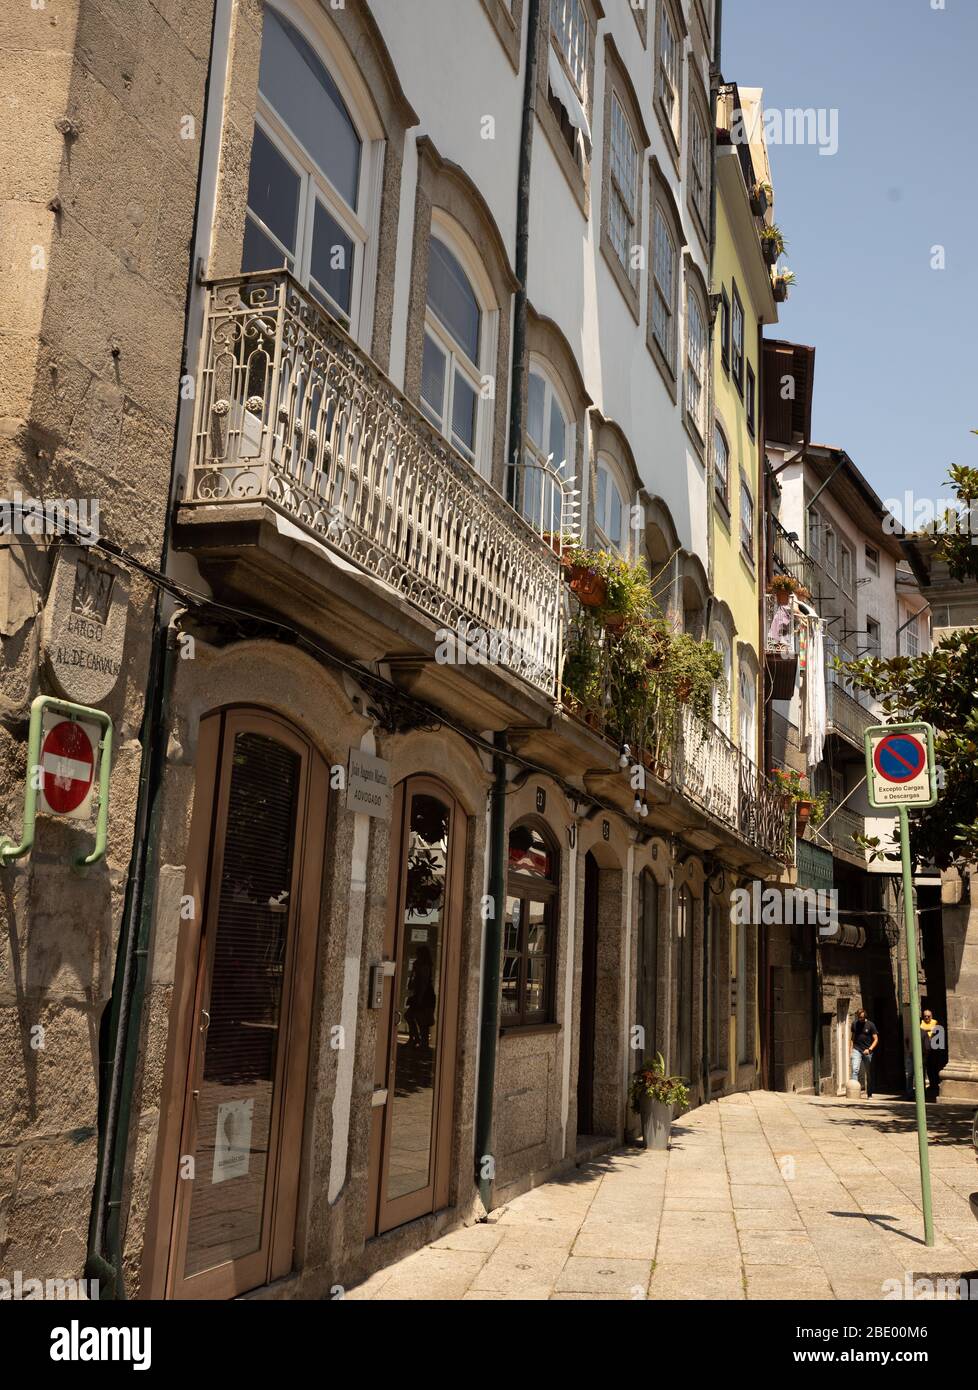 Narrow street of Largo al de Carvalho with tall terraced  old houses and buildings in the historic town centre of Guimaraes Northern Portugal Europe Stock Photo